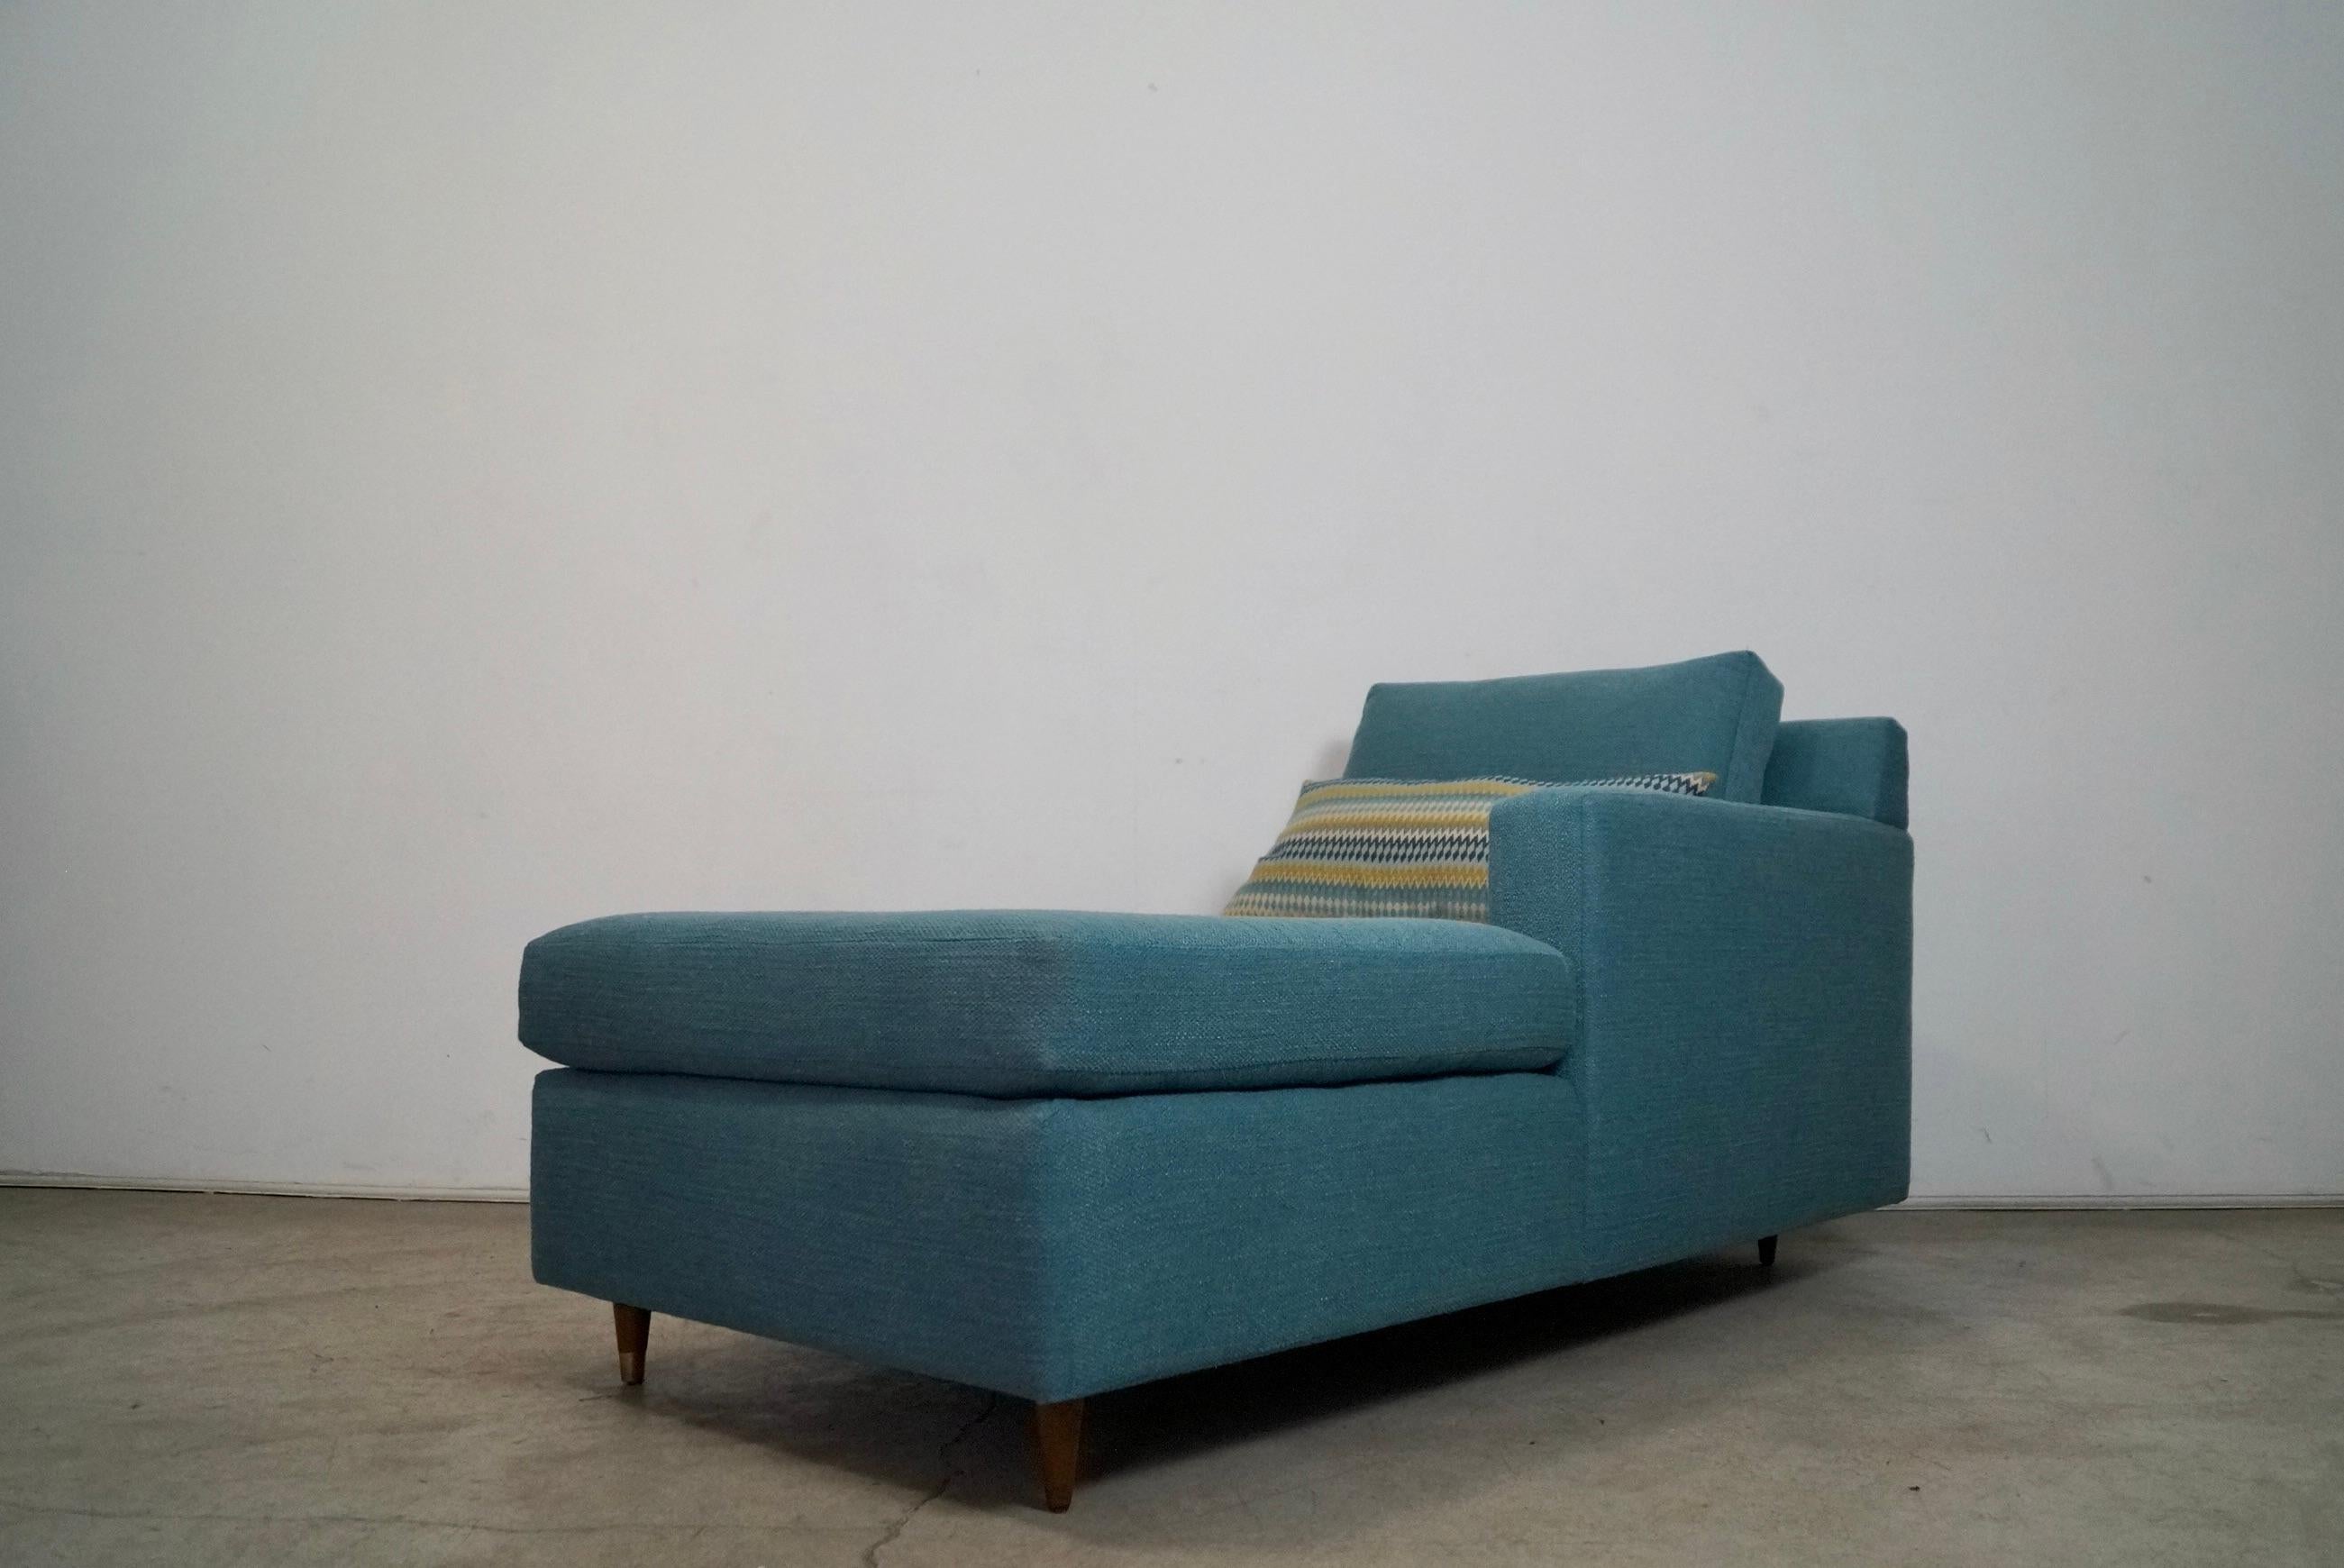 1970's Mid-Century Modern Single Arm Reupholstered Chaise Lounge Daybed For Sale 2